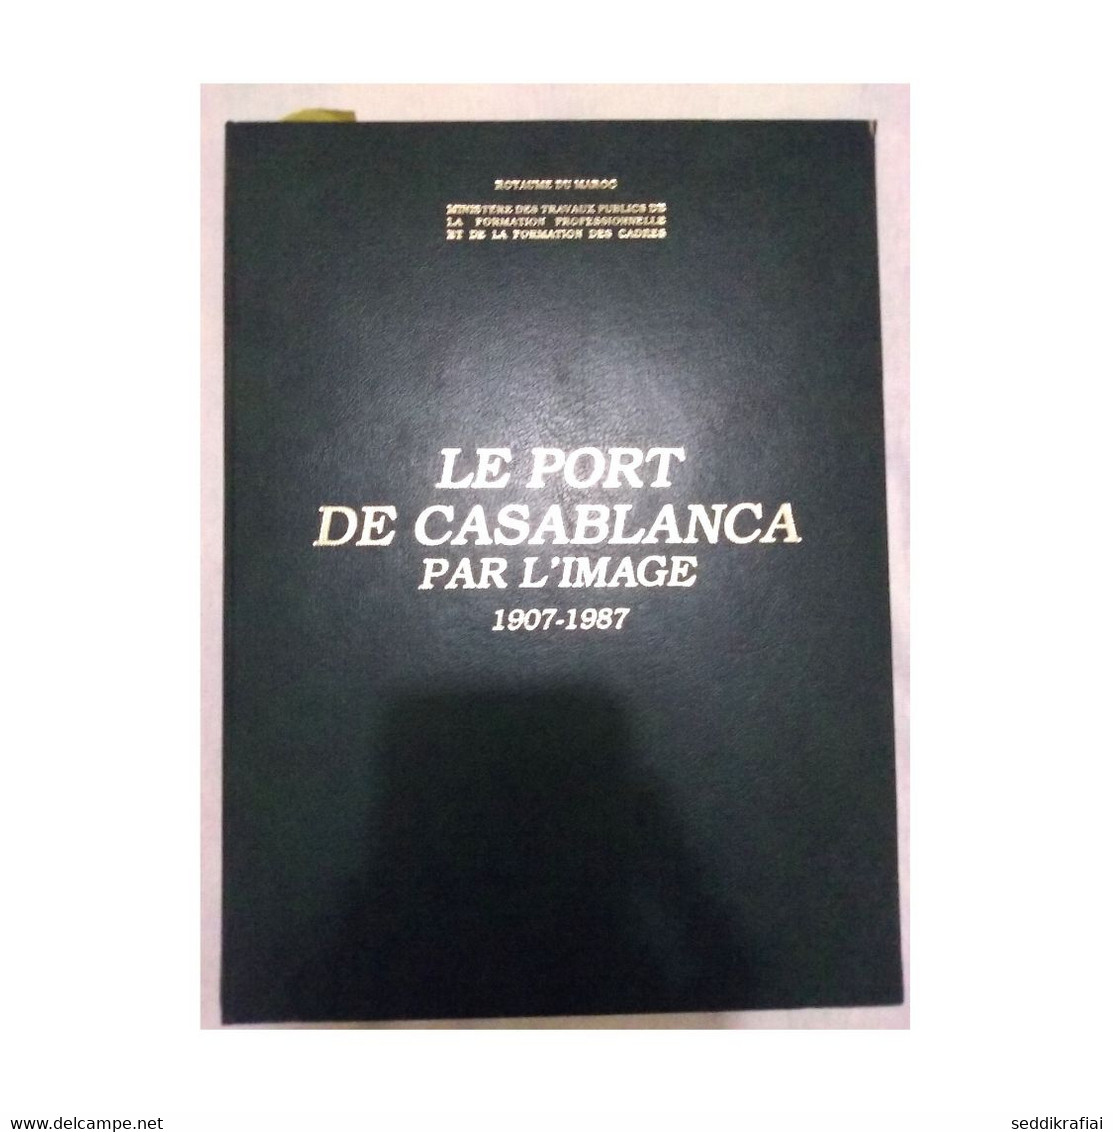 Vintage Morocco Book The Port Of Casablanca Binding Leather By The Image 1907-1987 Hassan 2 - Tijdschriften & Catalogi